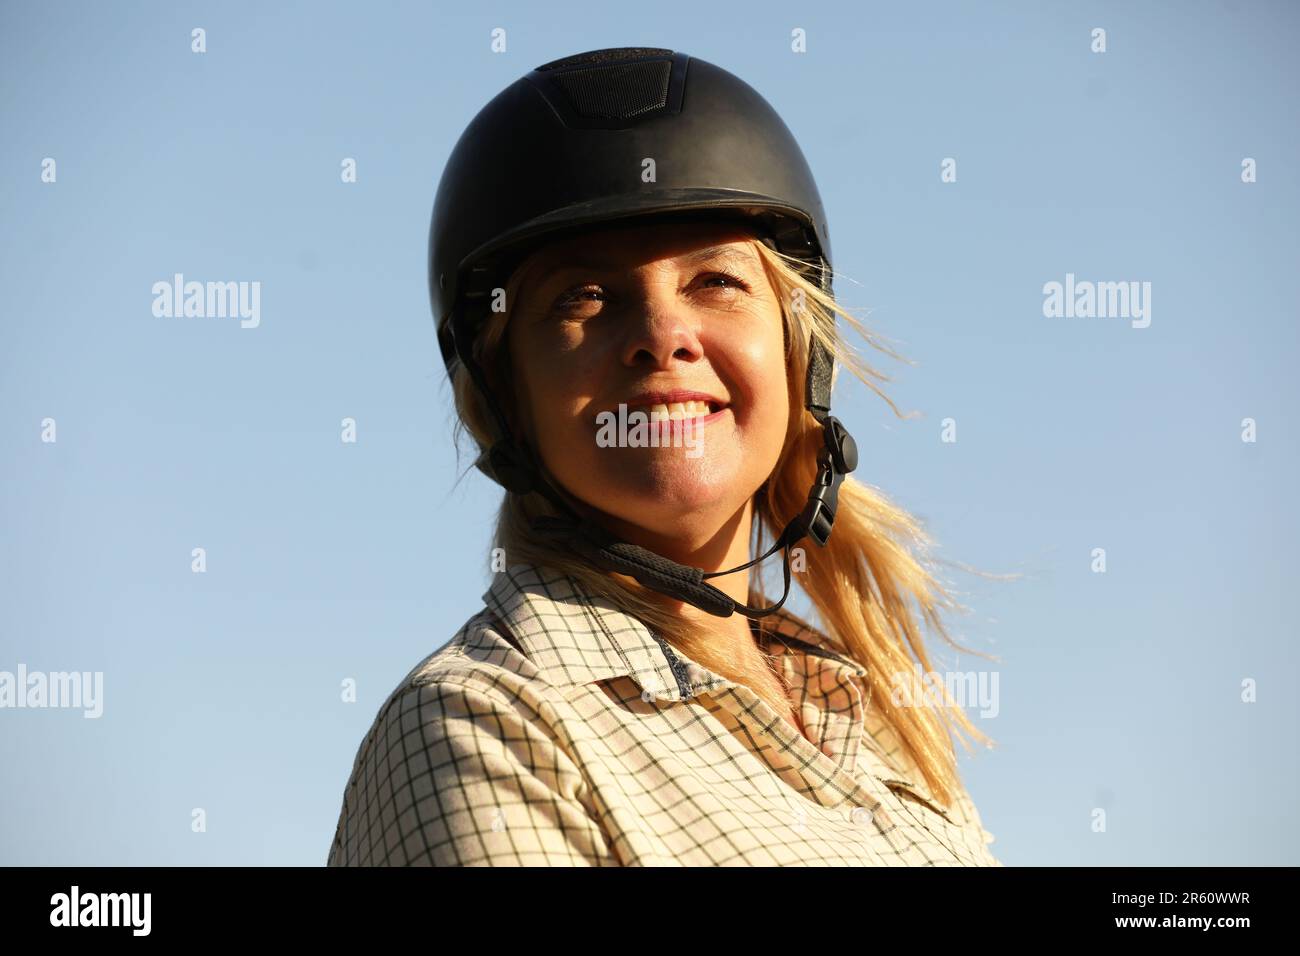 Closeup of a blonde woman wearing a riding hat, smiling Stock Photo